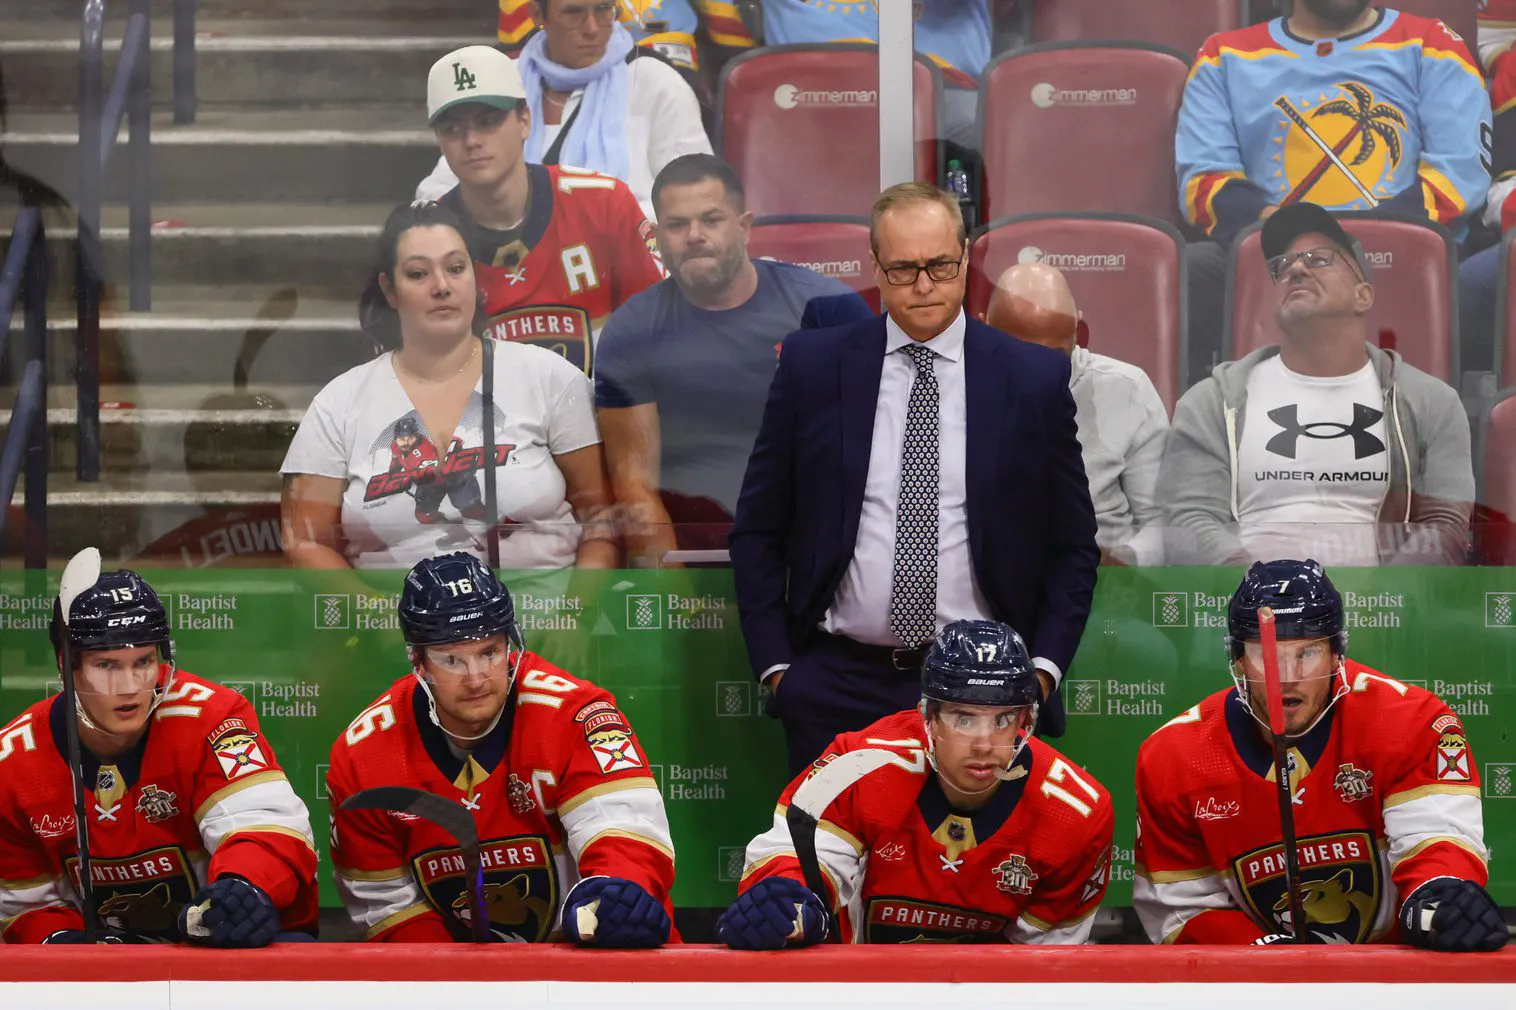 ‘Today is free quote f***ing day’: Florida Panthers’ Paul Maurice sounds off after loss to Islanders